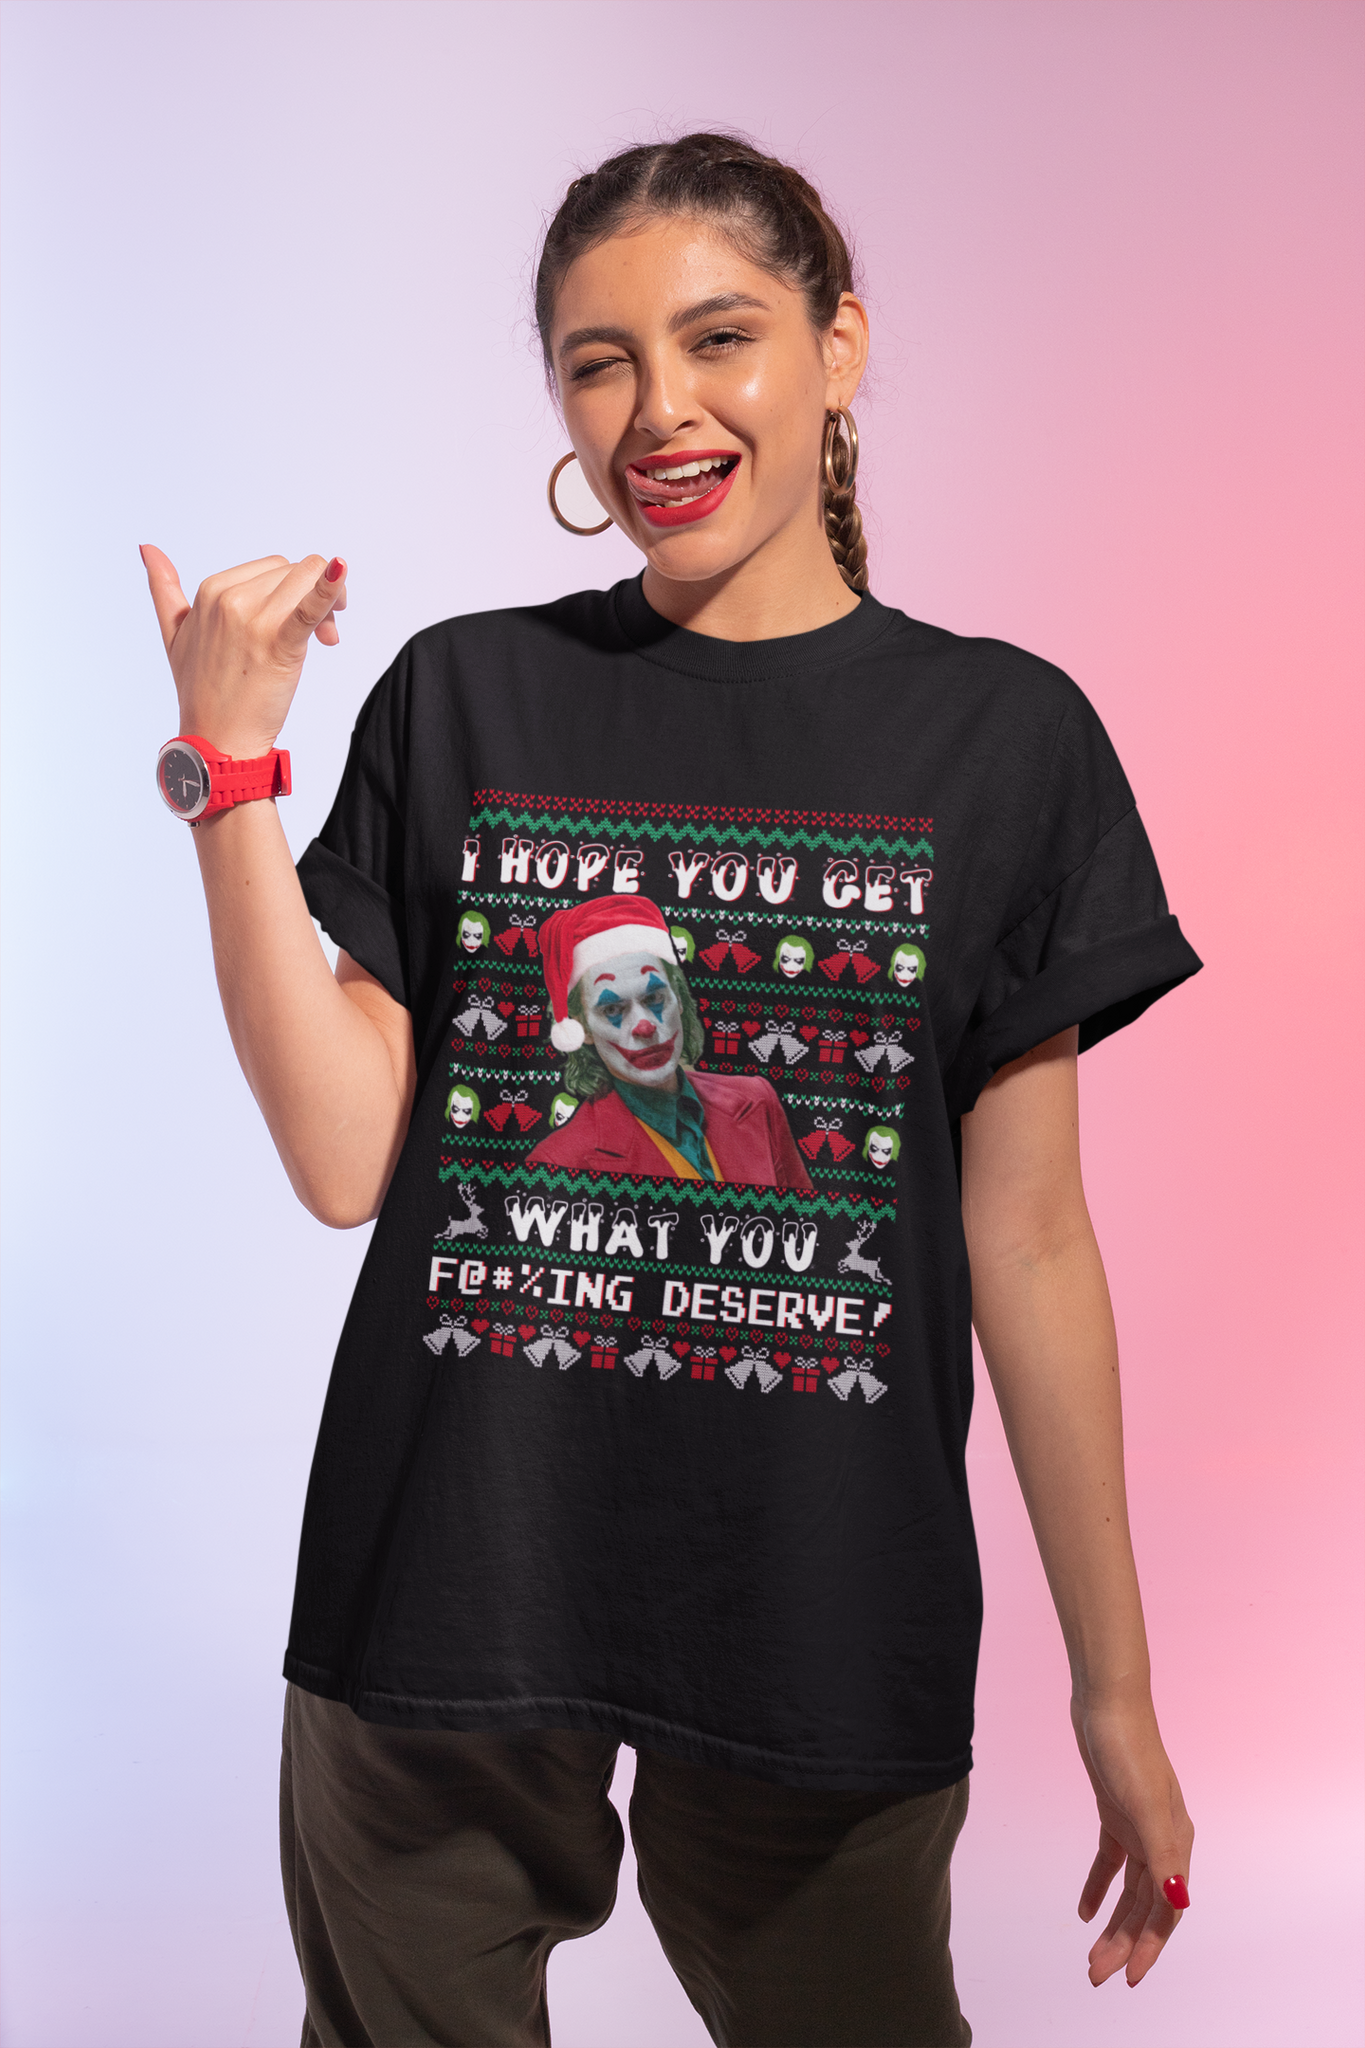 Joker Ugly Sweater Shirt, The Comedian T Shirt, I Hope You Get What You Deserve Tshirt, Halloween Gifts, Christmas Gifts